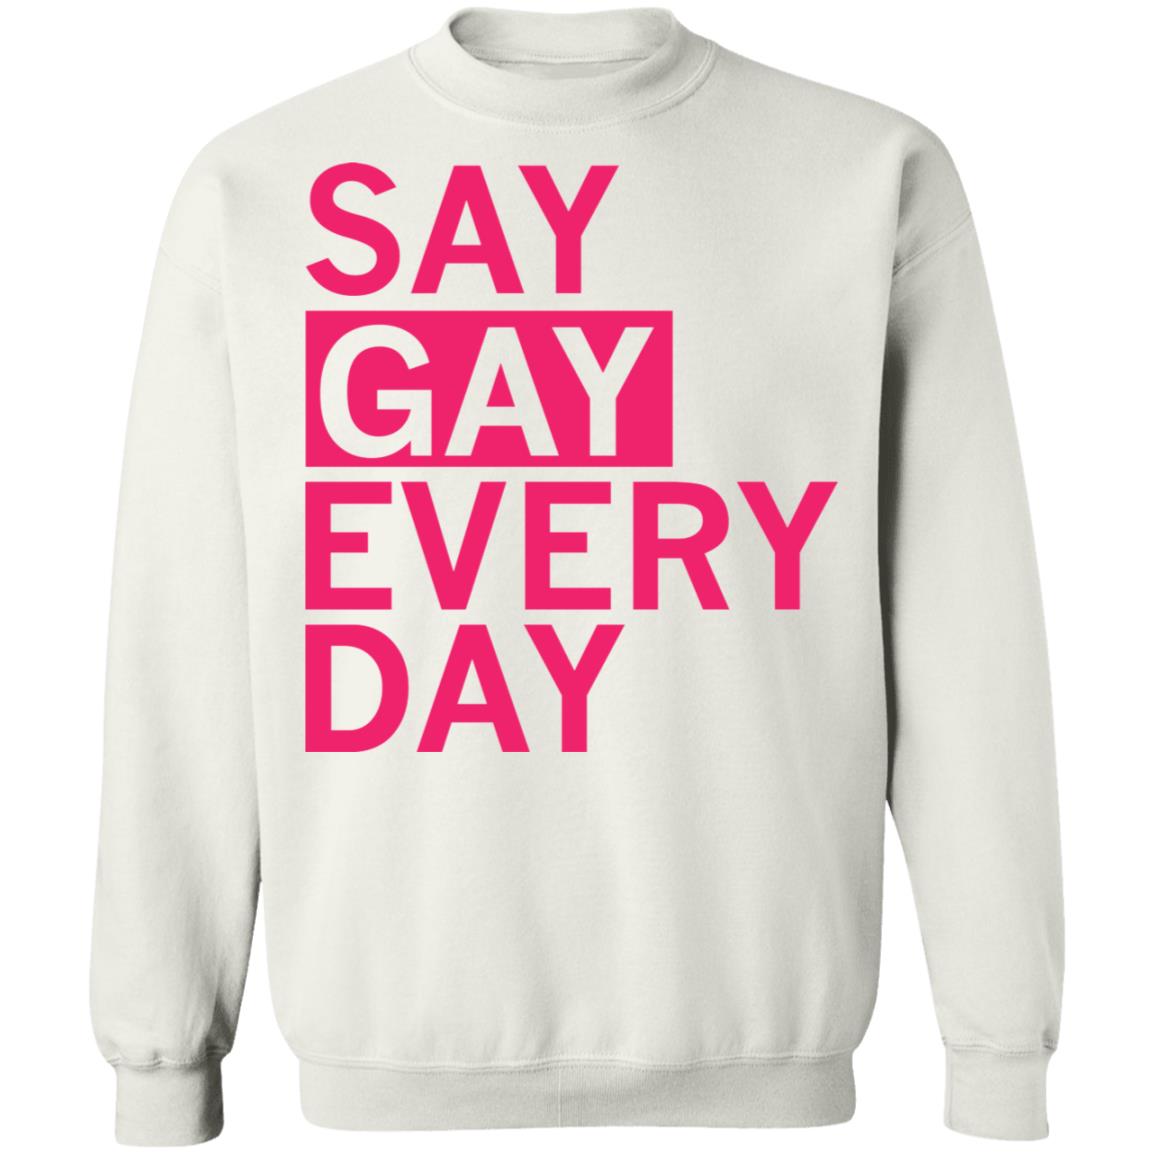 Say Gay Every Day Shirt 2